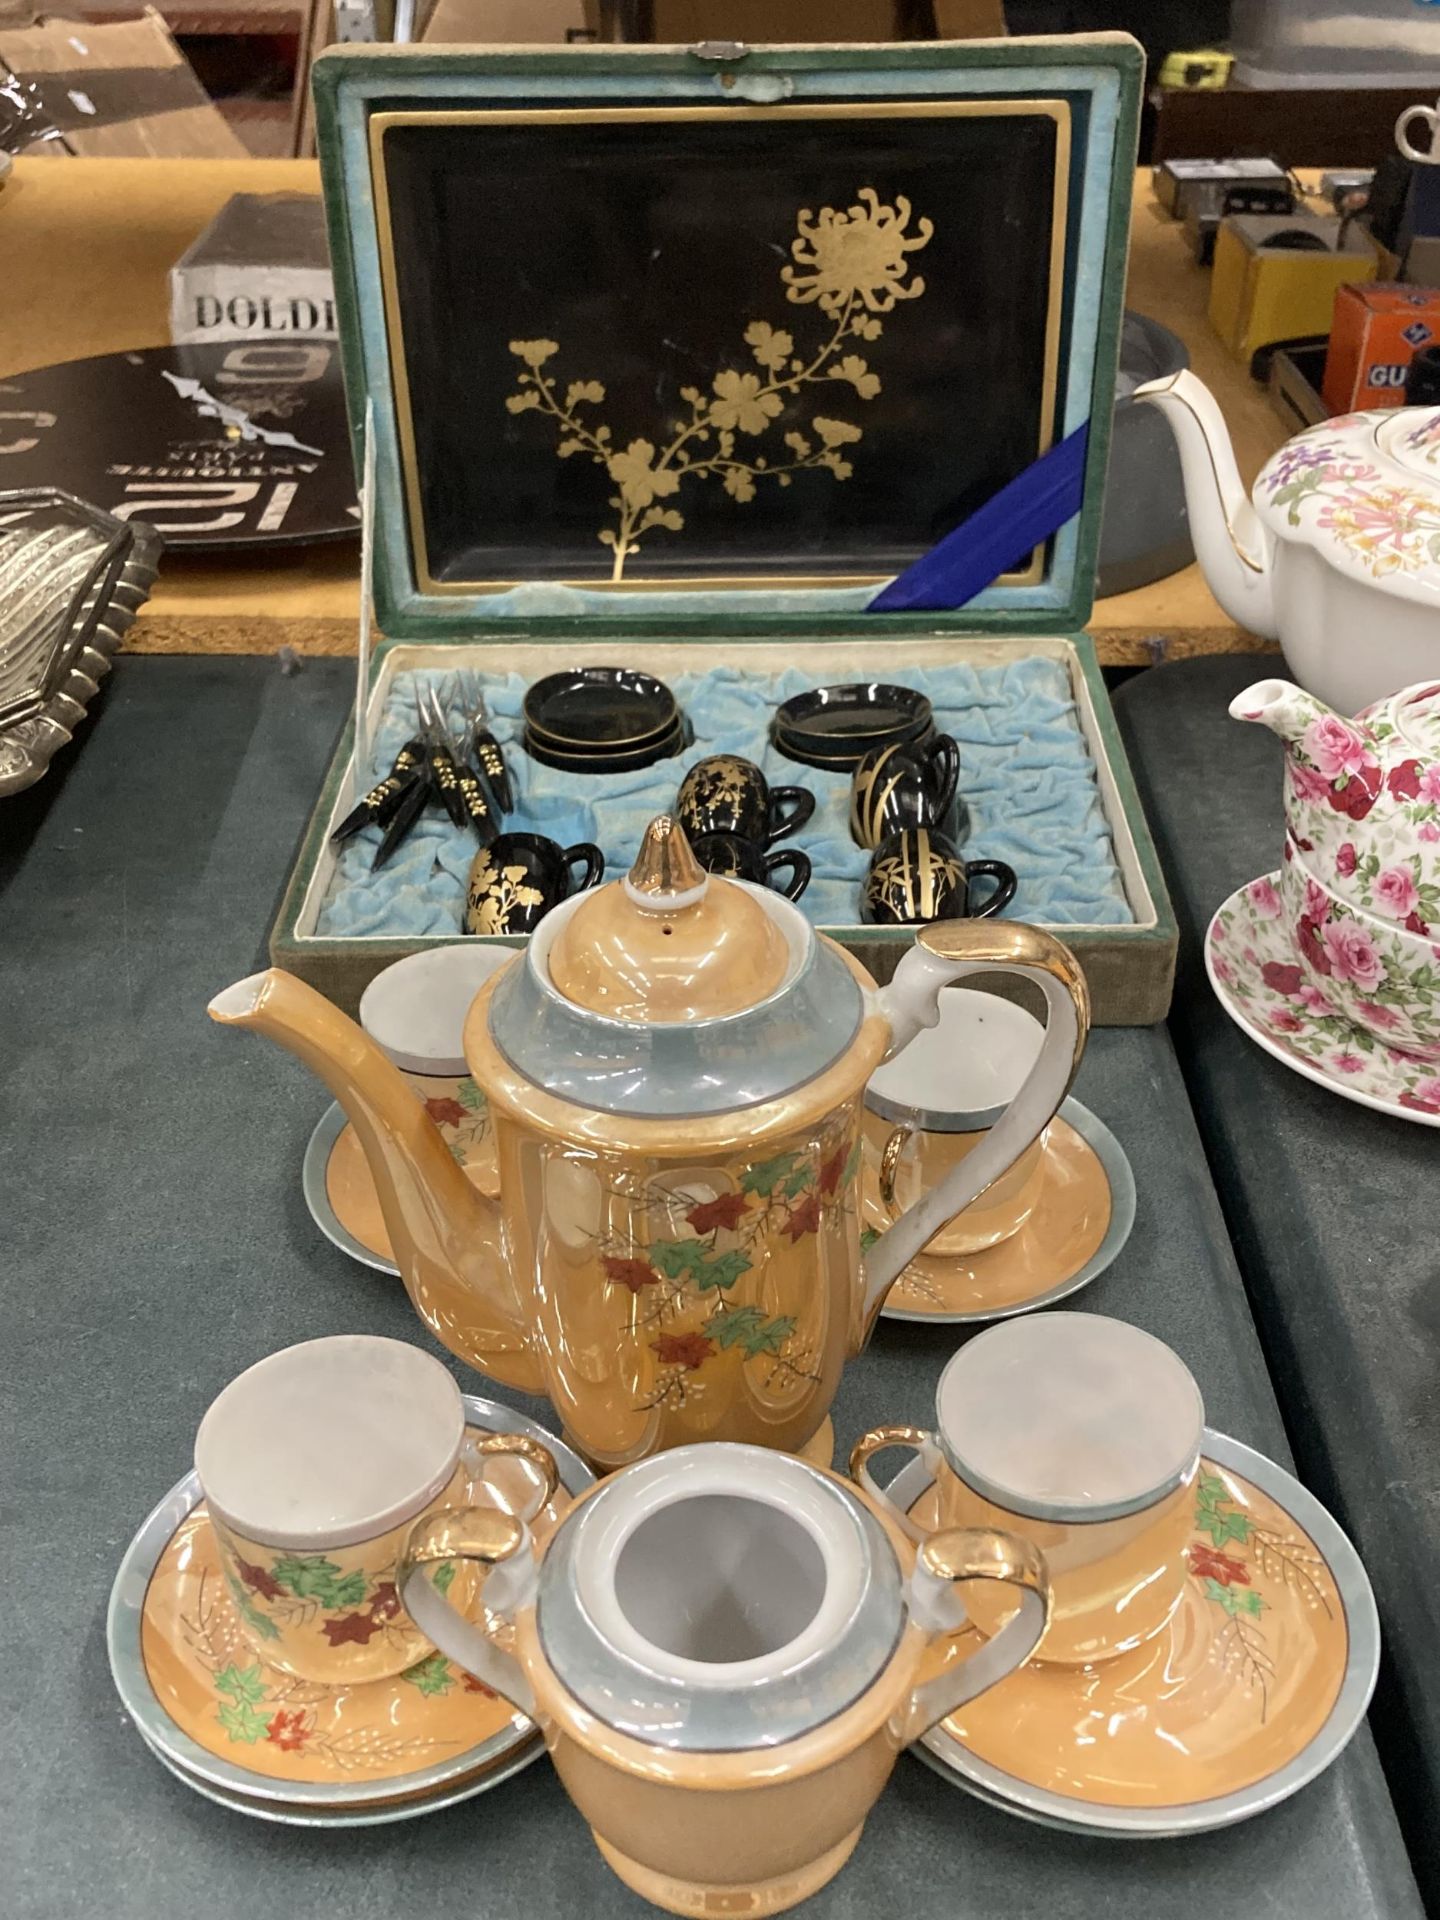 AN ORANGE LUSTRE COFFEE SET TO INCLUDE A COFFEE POT, SUGAR BASIN CUPS AND SAUCERS PLUS A SET OF